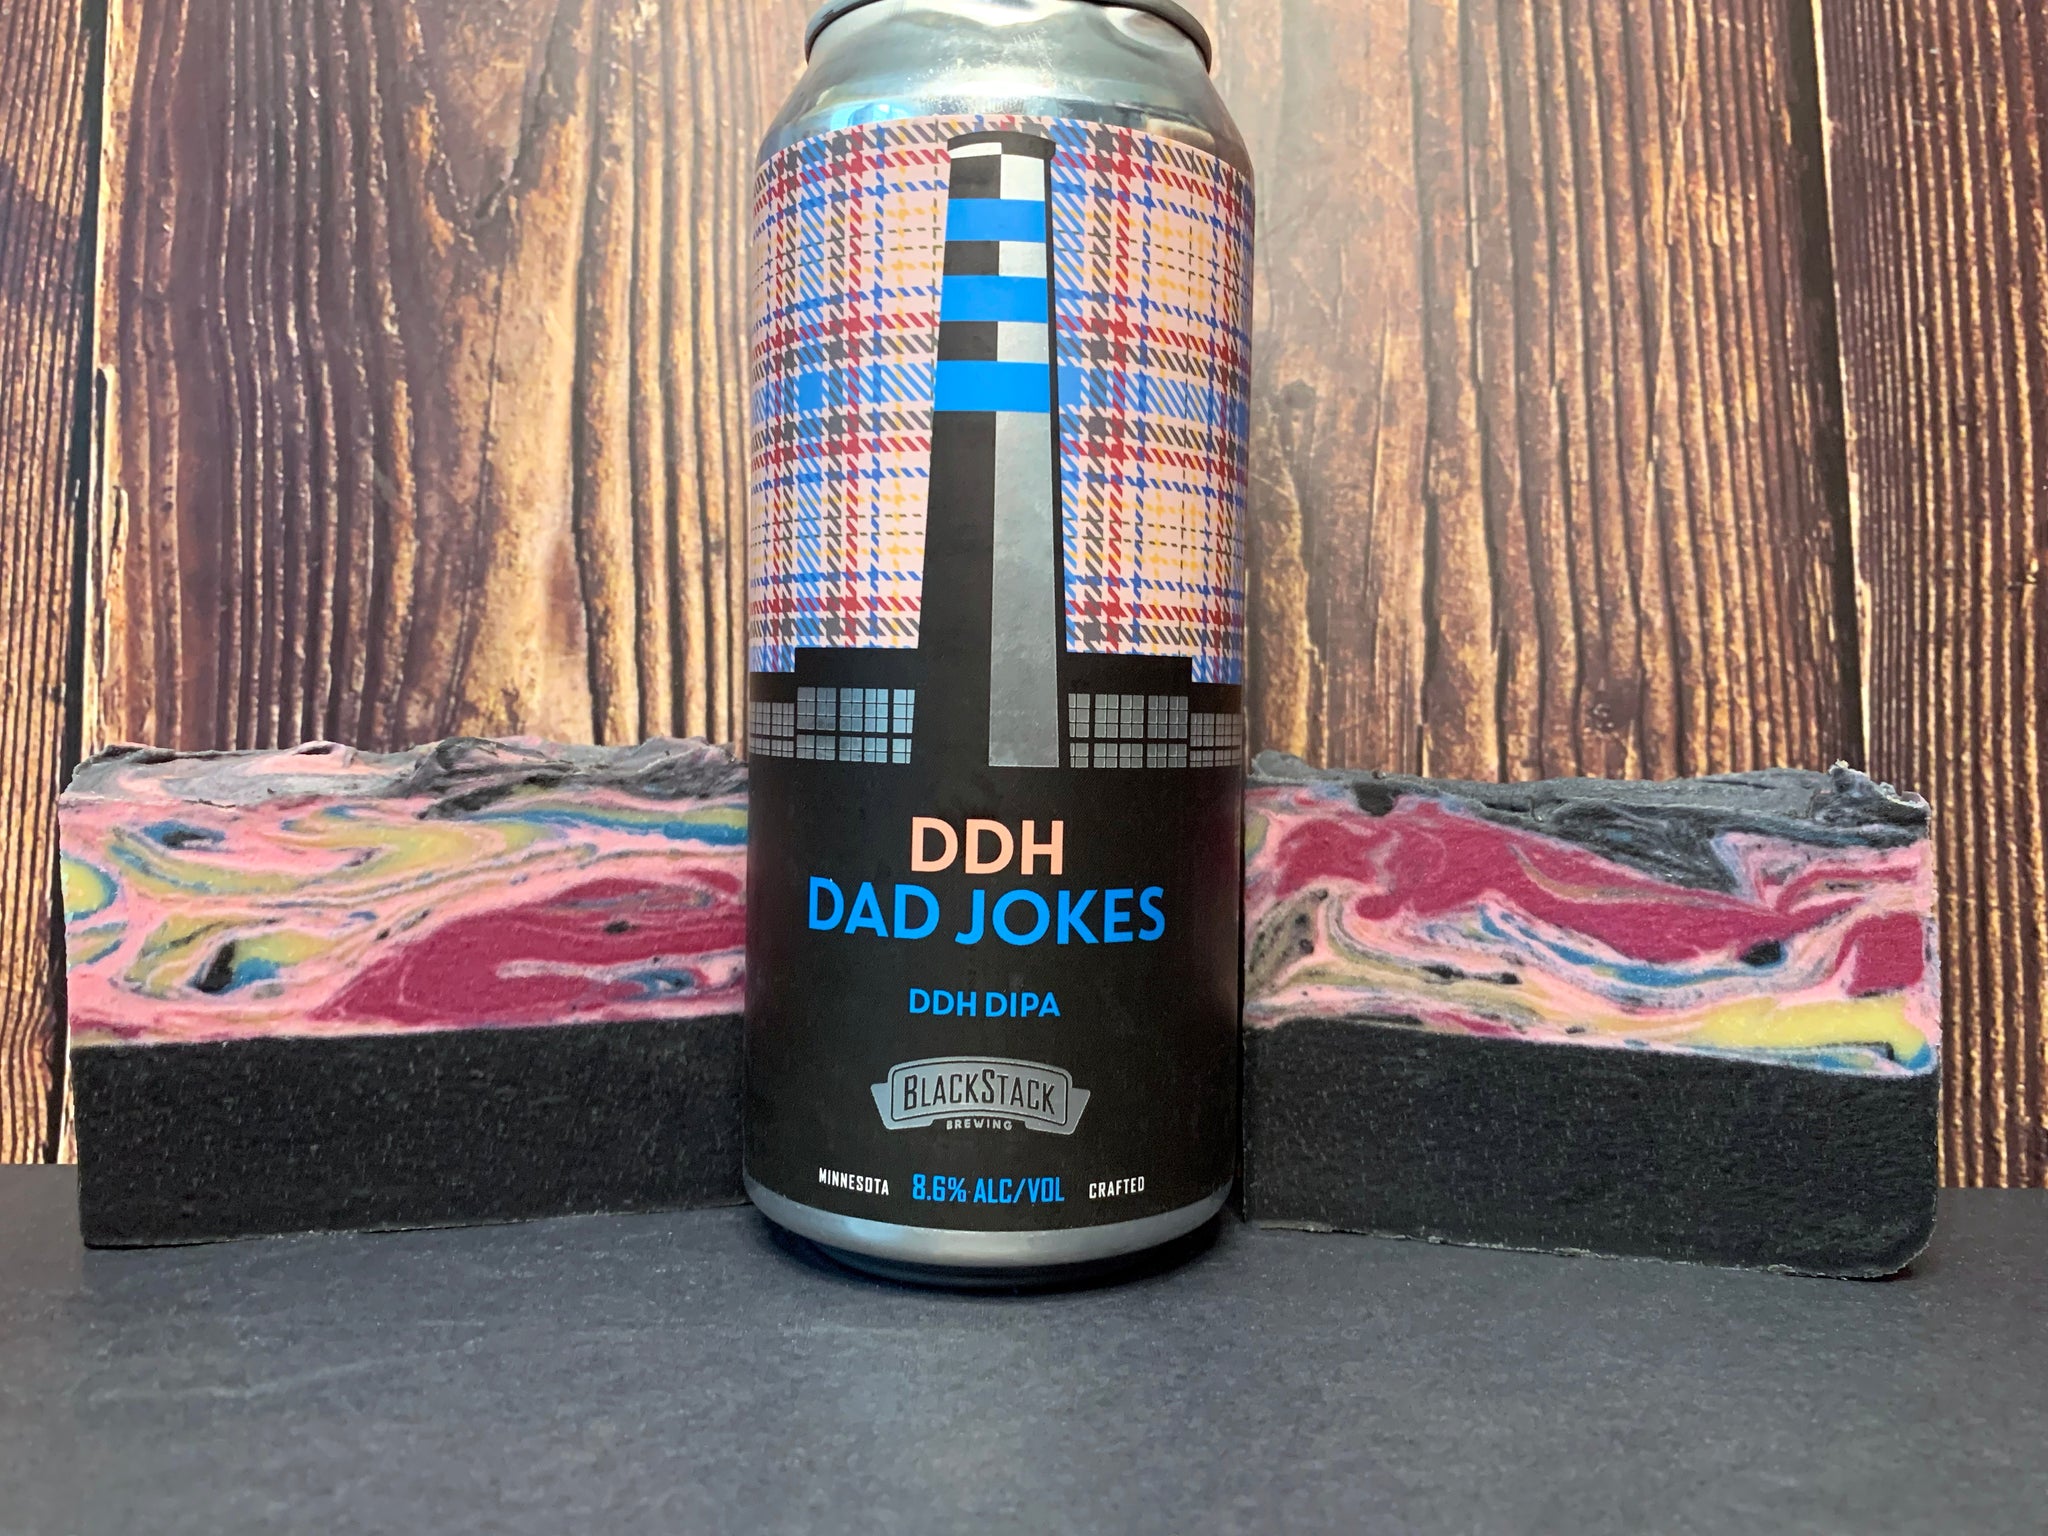 Minnesota beer soap handmade with Dad Jokes DDH DIPA from BlackStack Brewing St. Paul Minnesota craft brewery craft beer soap for him with activated charcoal colorful and black beer soap for him spunkndisorderly beer soap